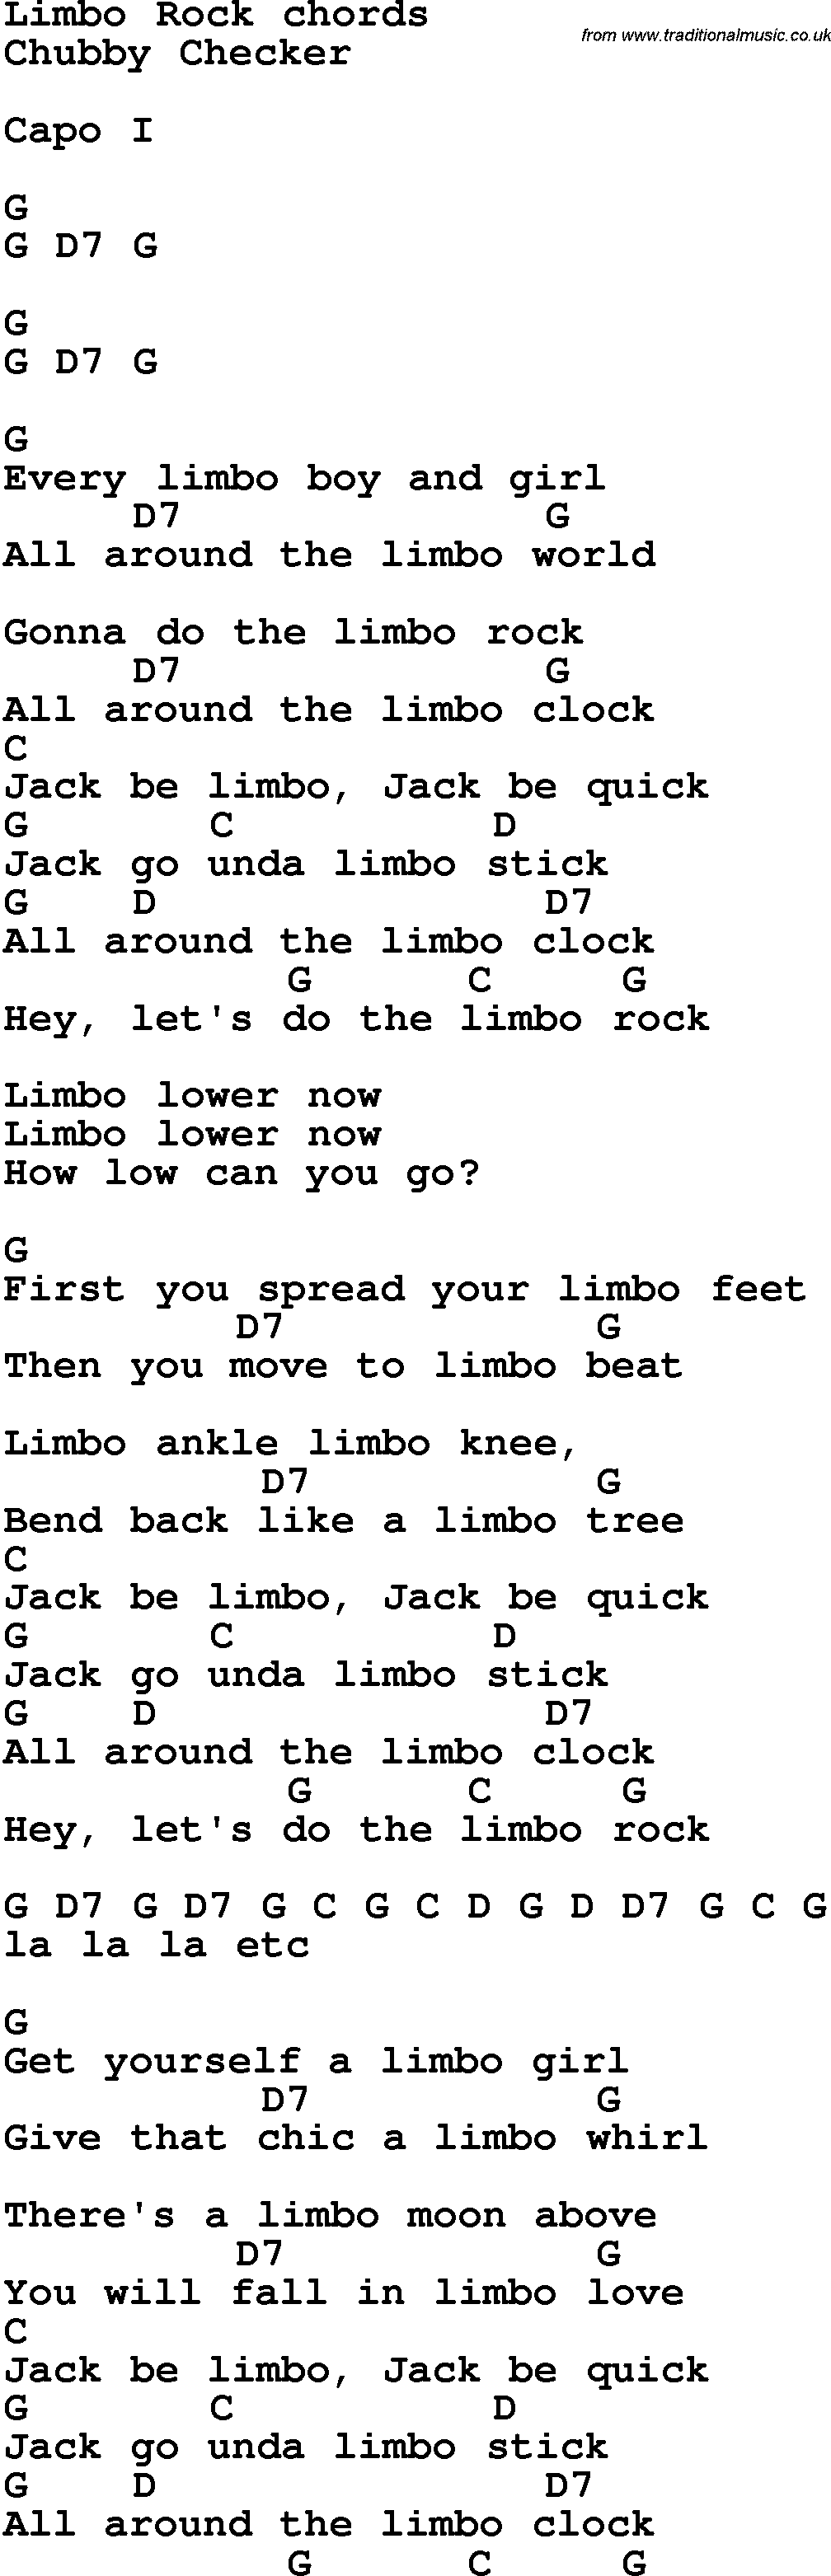 Song Lyrics with guitar chords for Limbo Rock